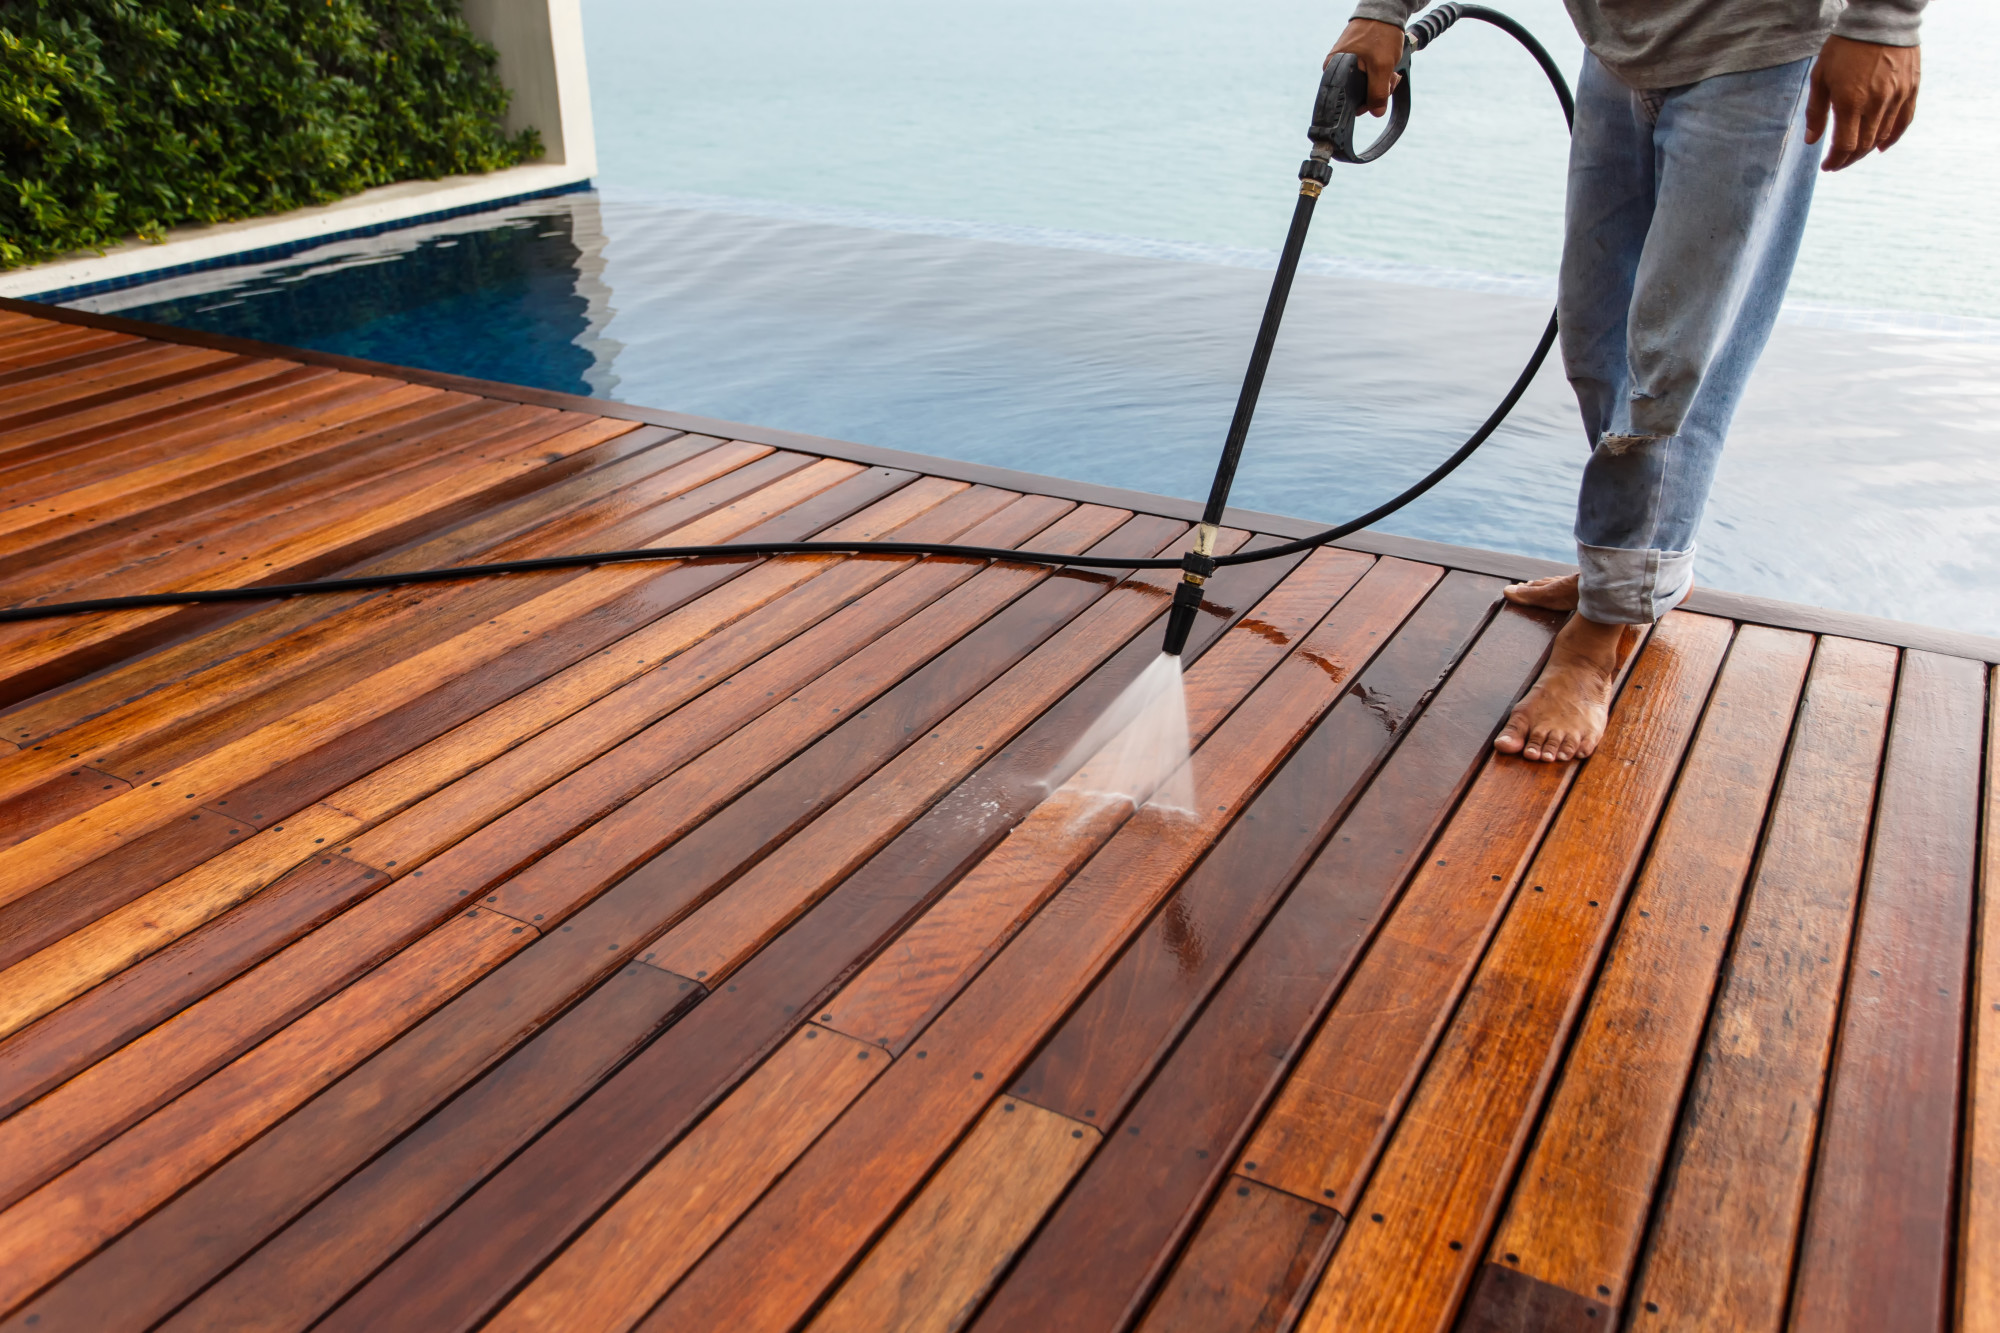 If you clean your deck the wrong way, or not at all, you can end up ruining it! Learn how to avoid these deck cleaning mistakes here.